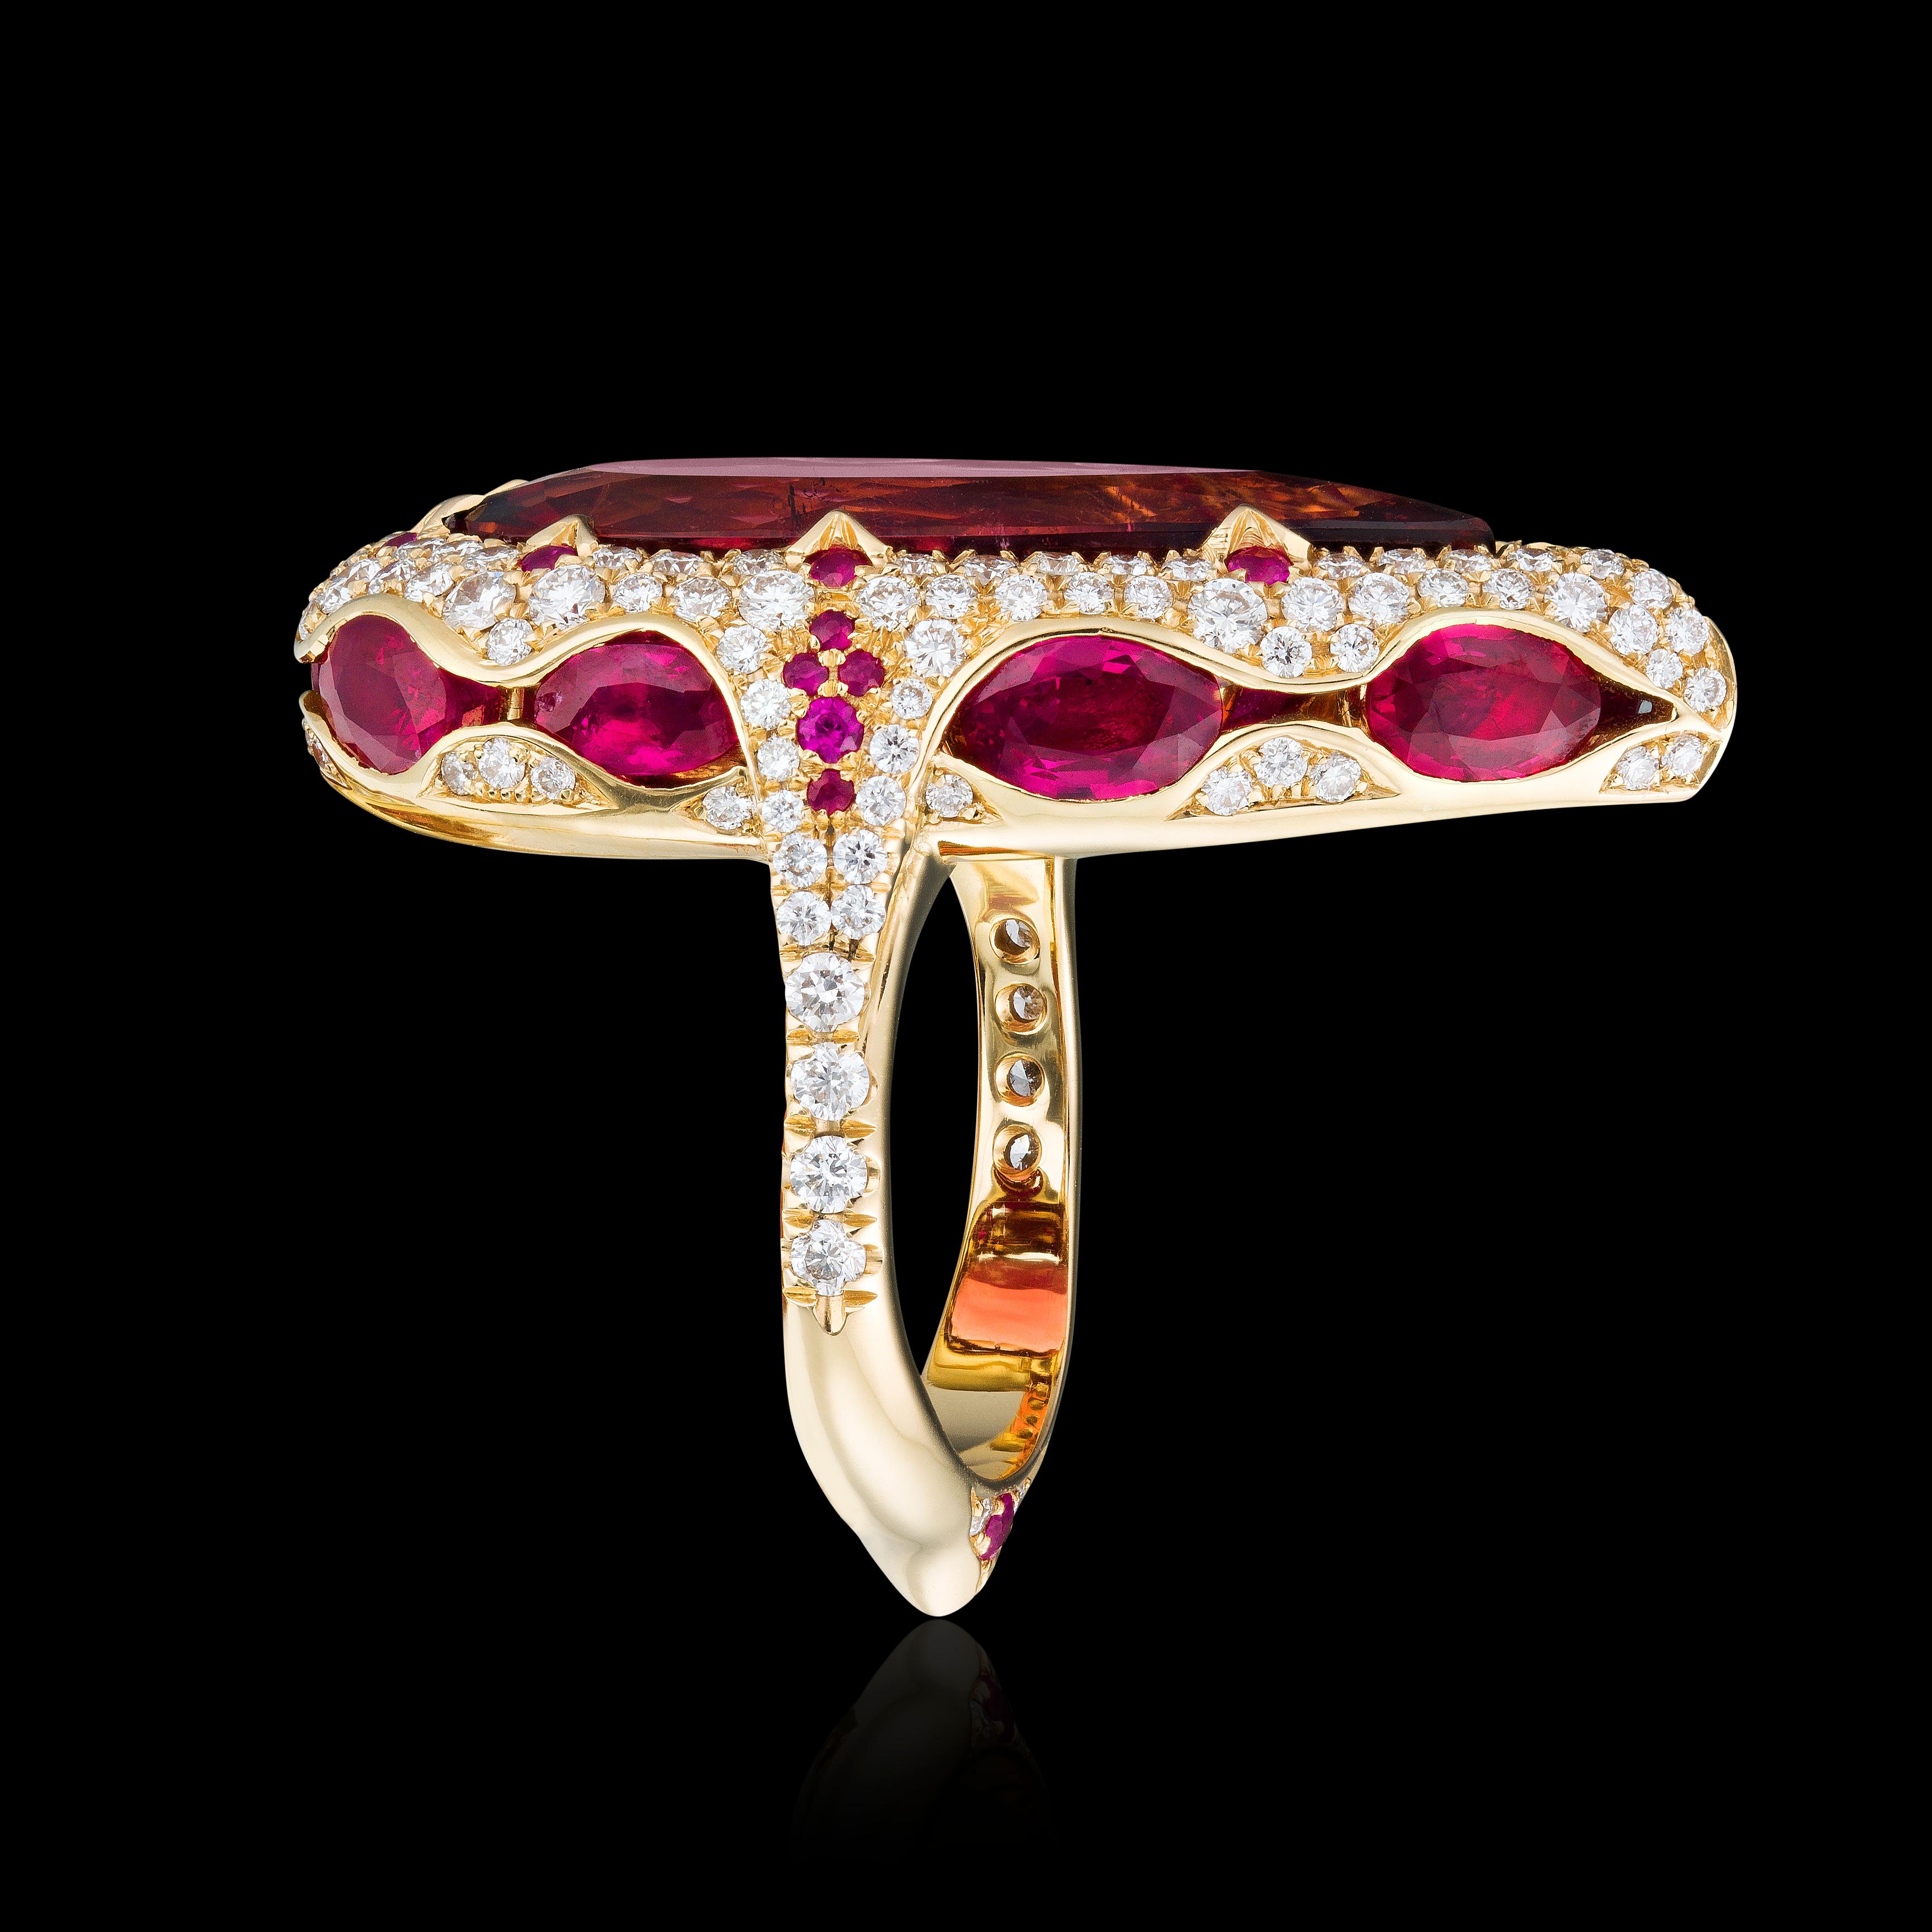 Red tourmaline, rubellite, set in a 3D nest of diamonds and rubies